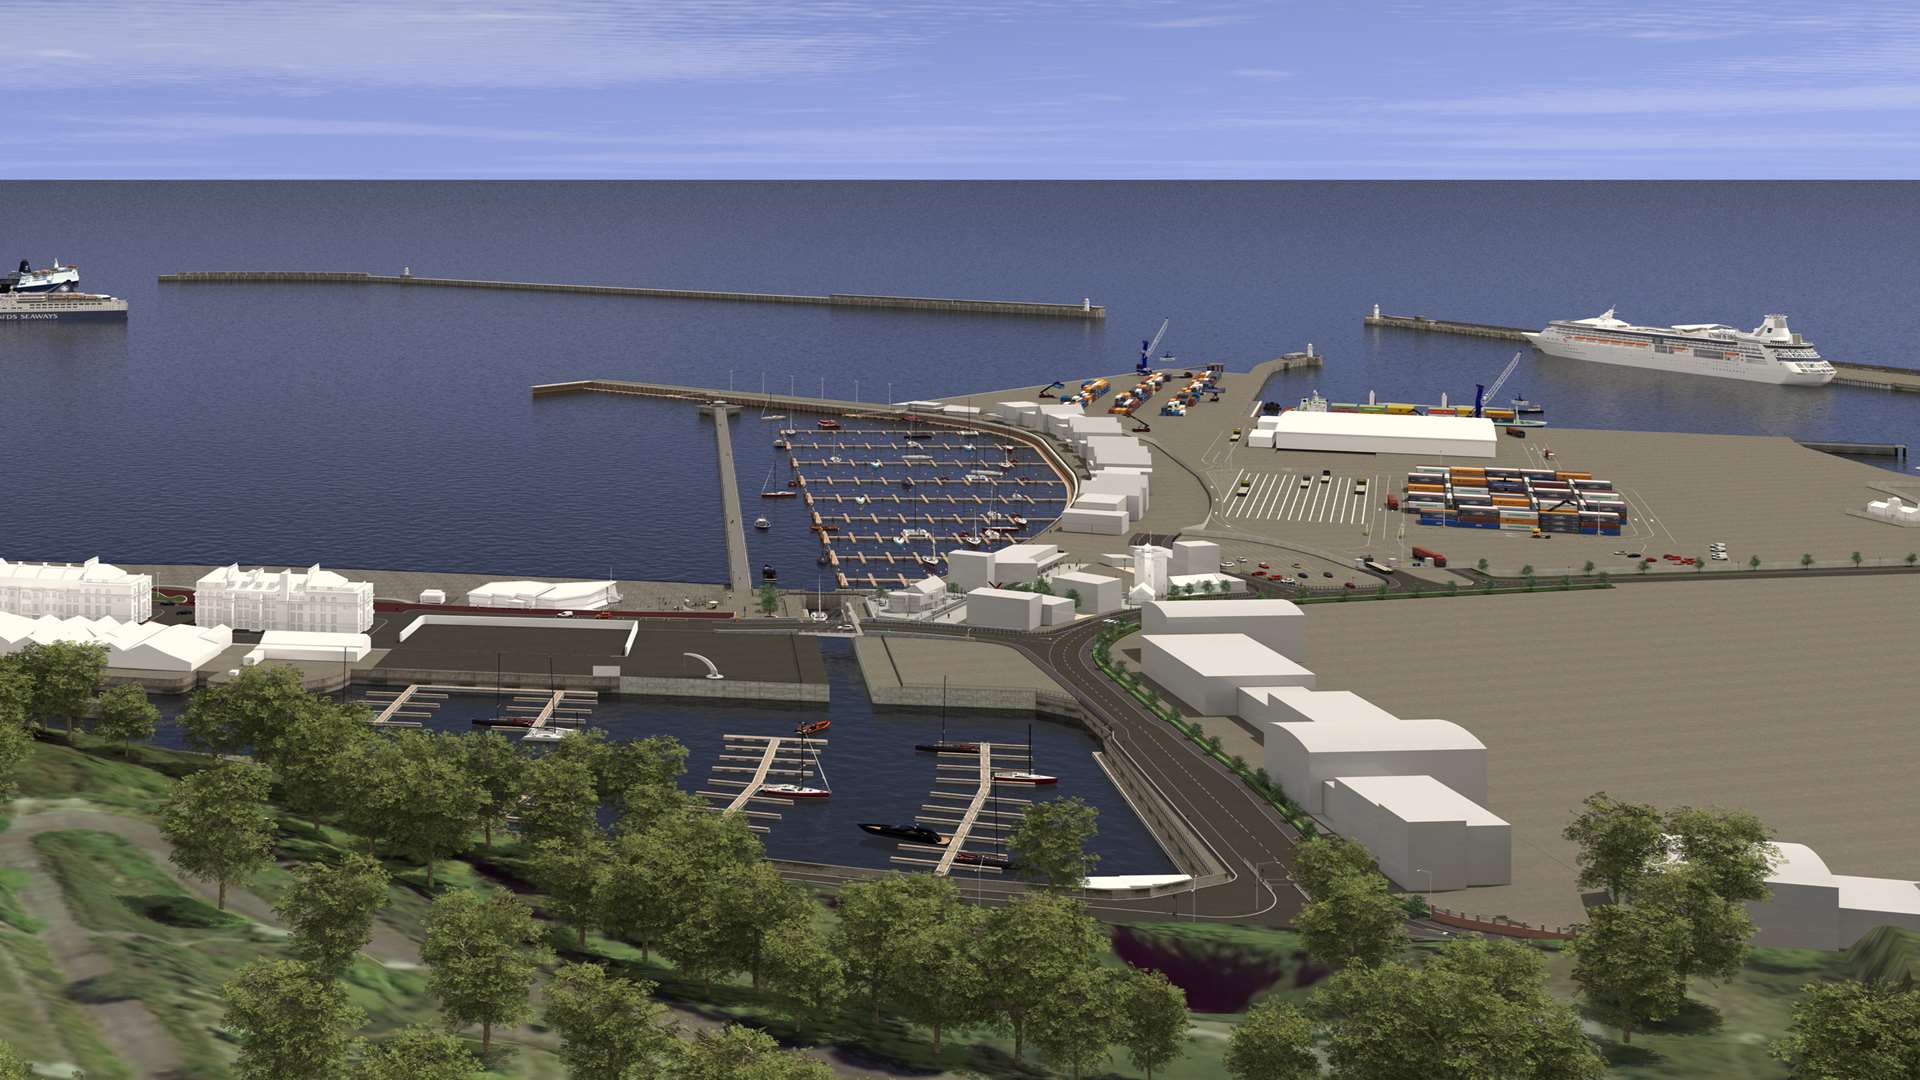 Artist's impression of the Dover Western Docks Revival. Image courtesy of the Port of Dover